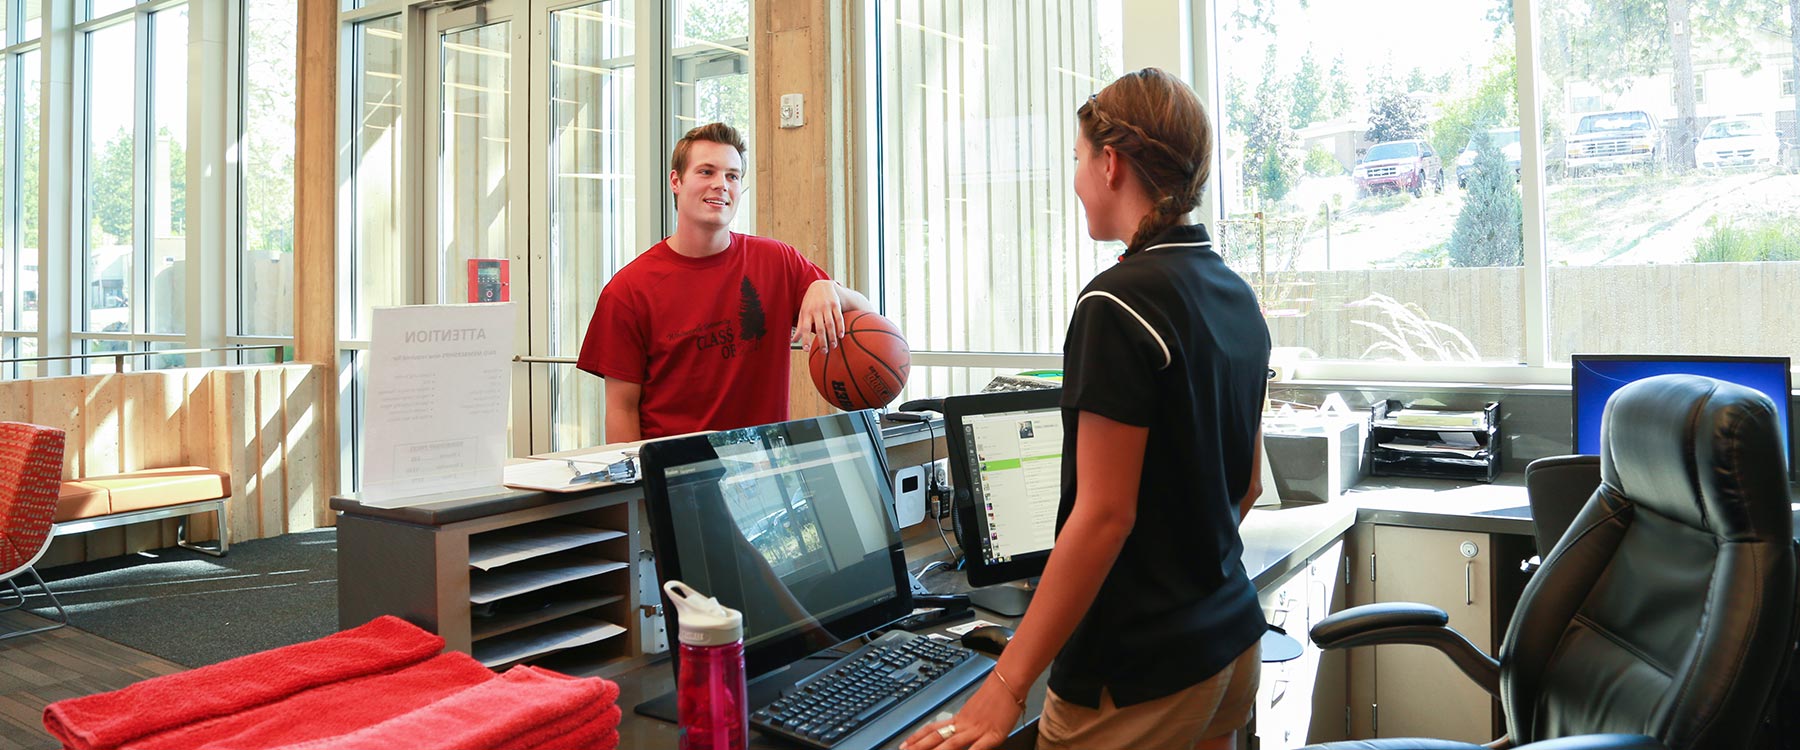 A student holding a basketball stands at the front desk and speaks with a U-Rec student employee.